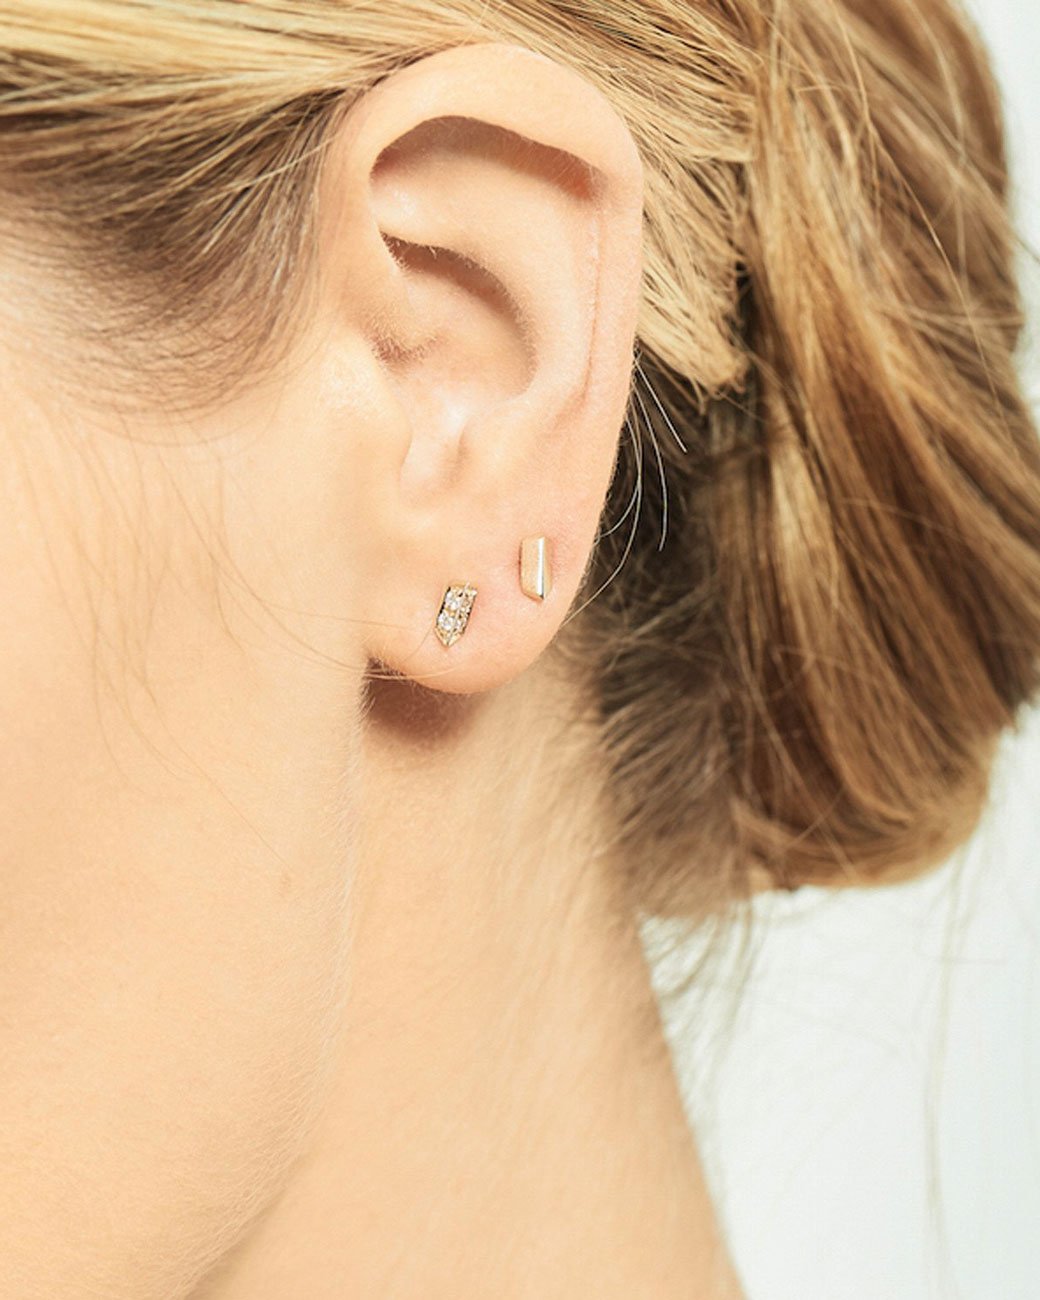 14k rose gold angled bar stud earring by Selin Kent, shown on an ear.